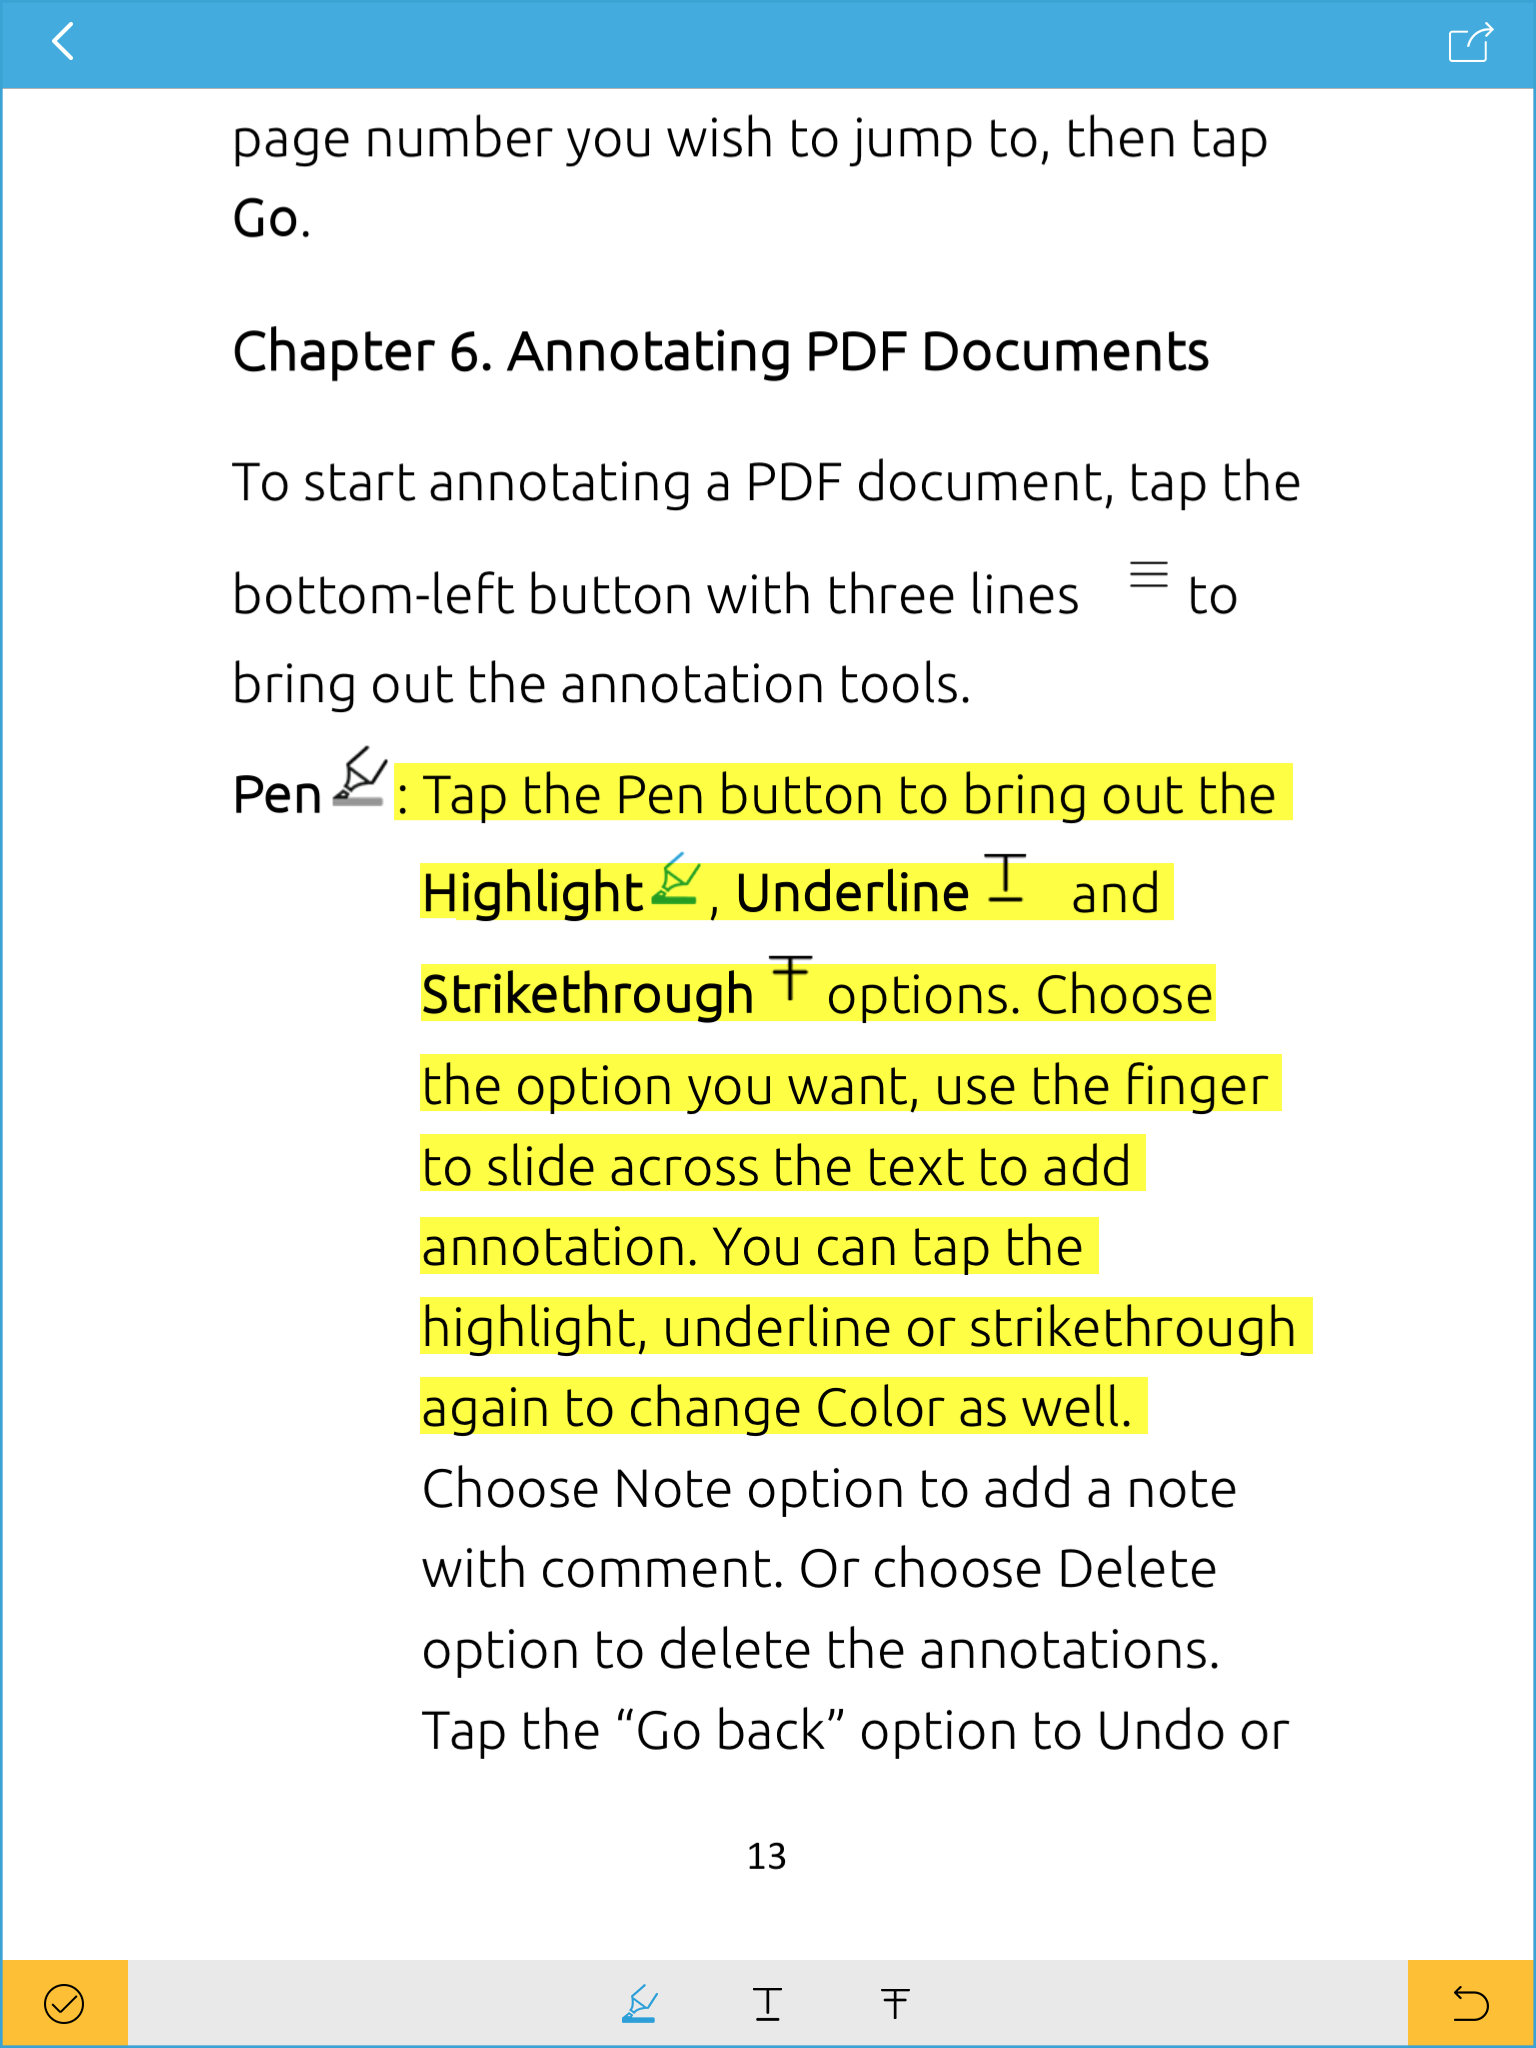 How to Make PDF annotation on iPad